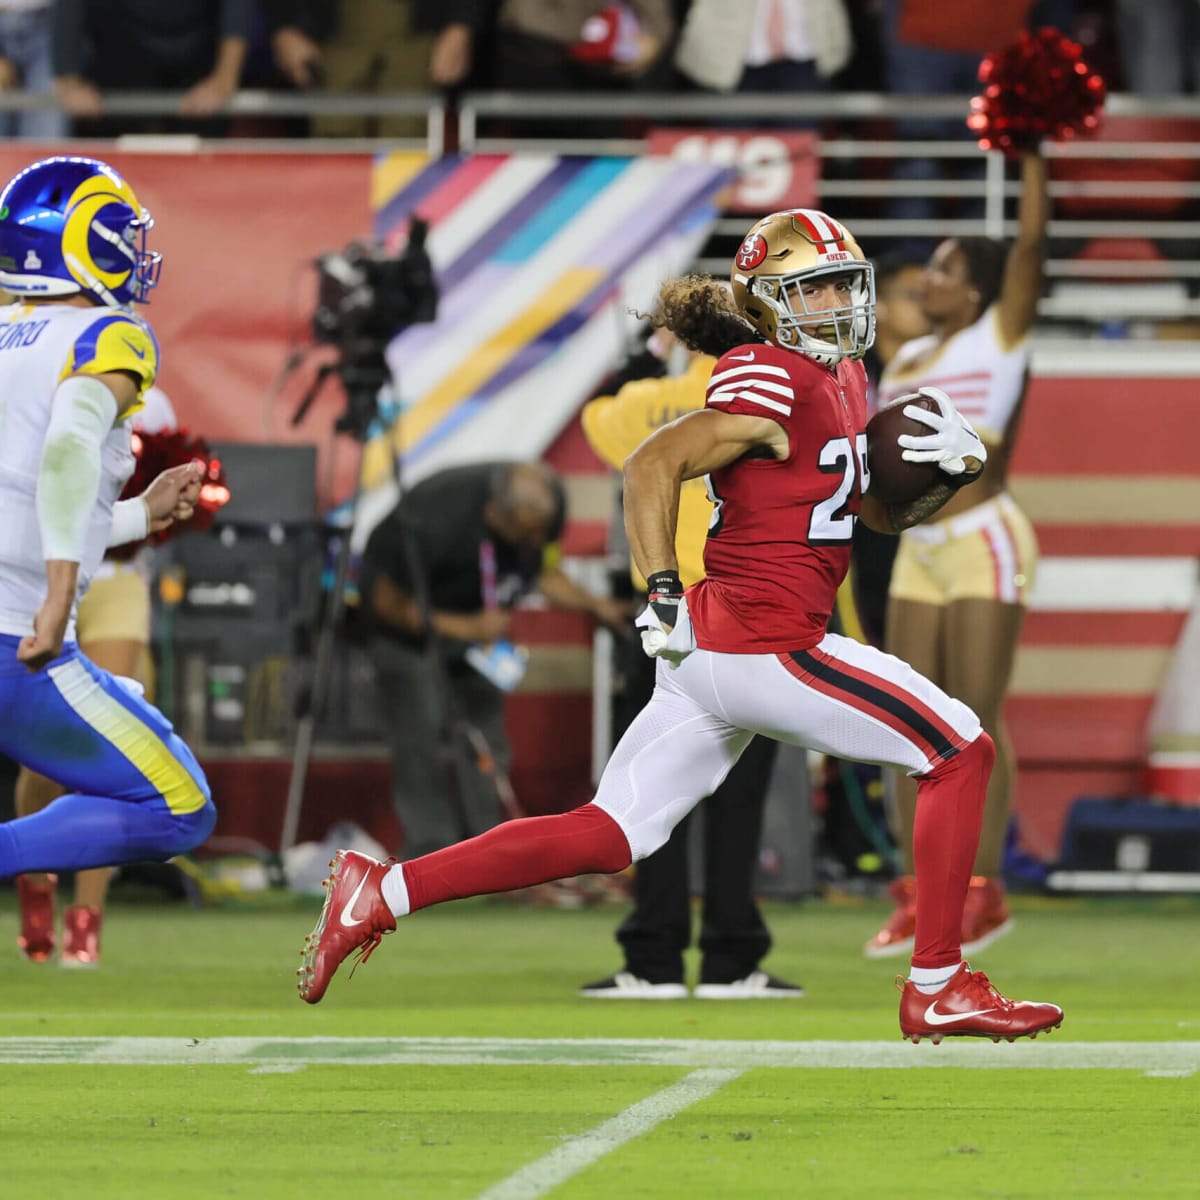 Los Angeles Rams vs. San Francisco 49ers: How to Watch, Betting